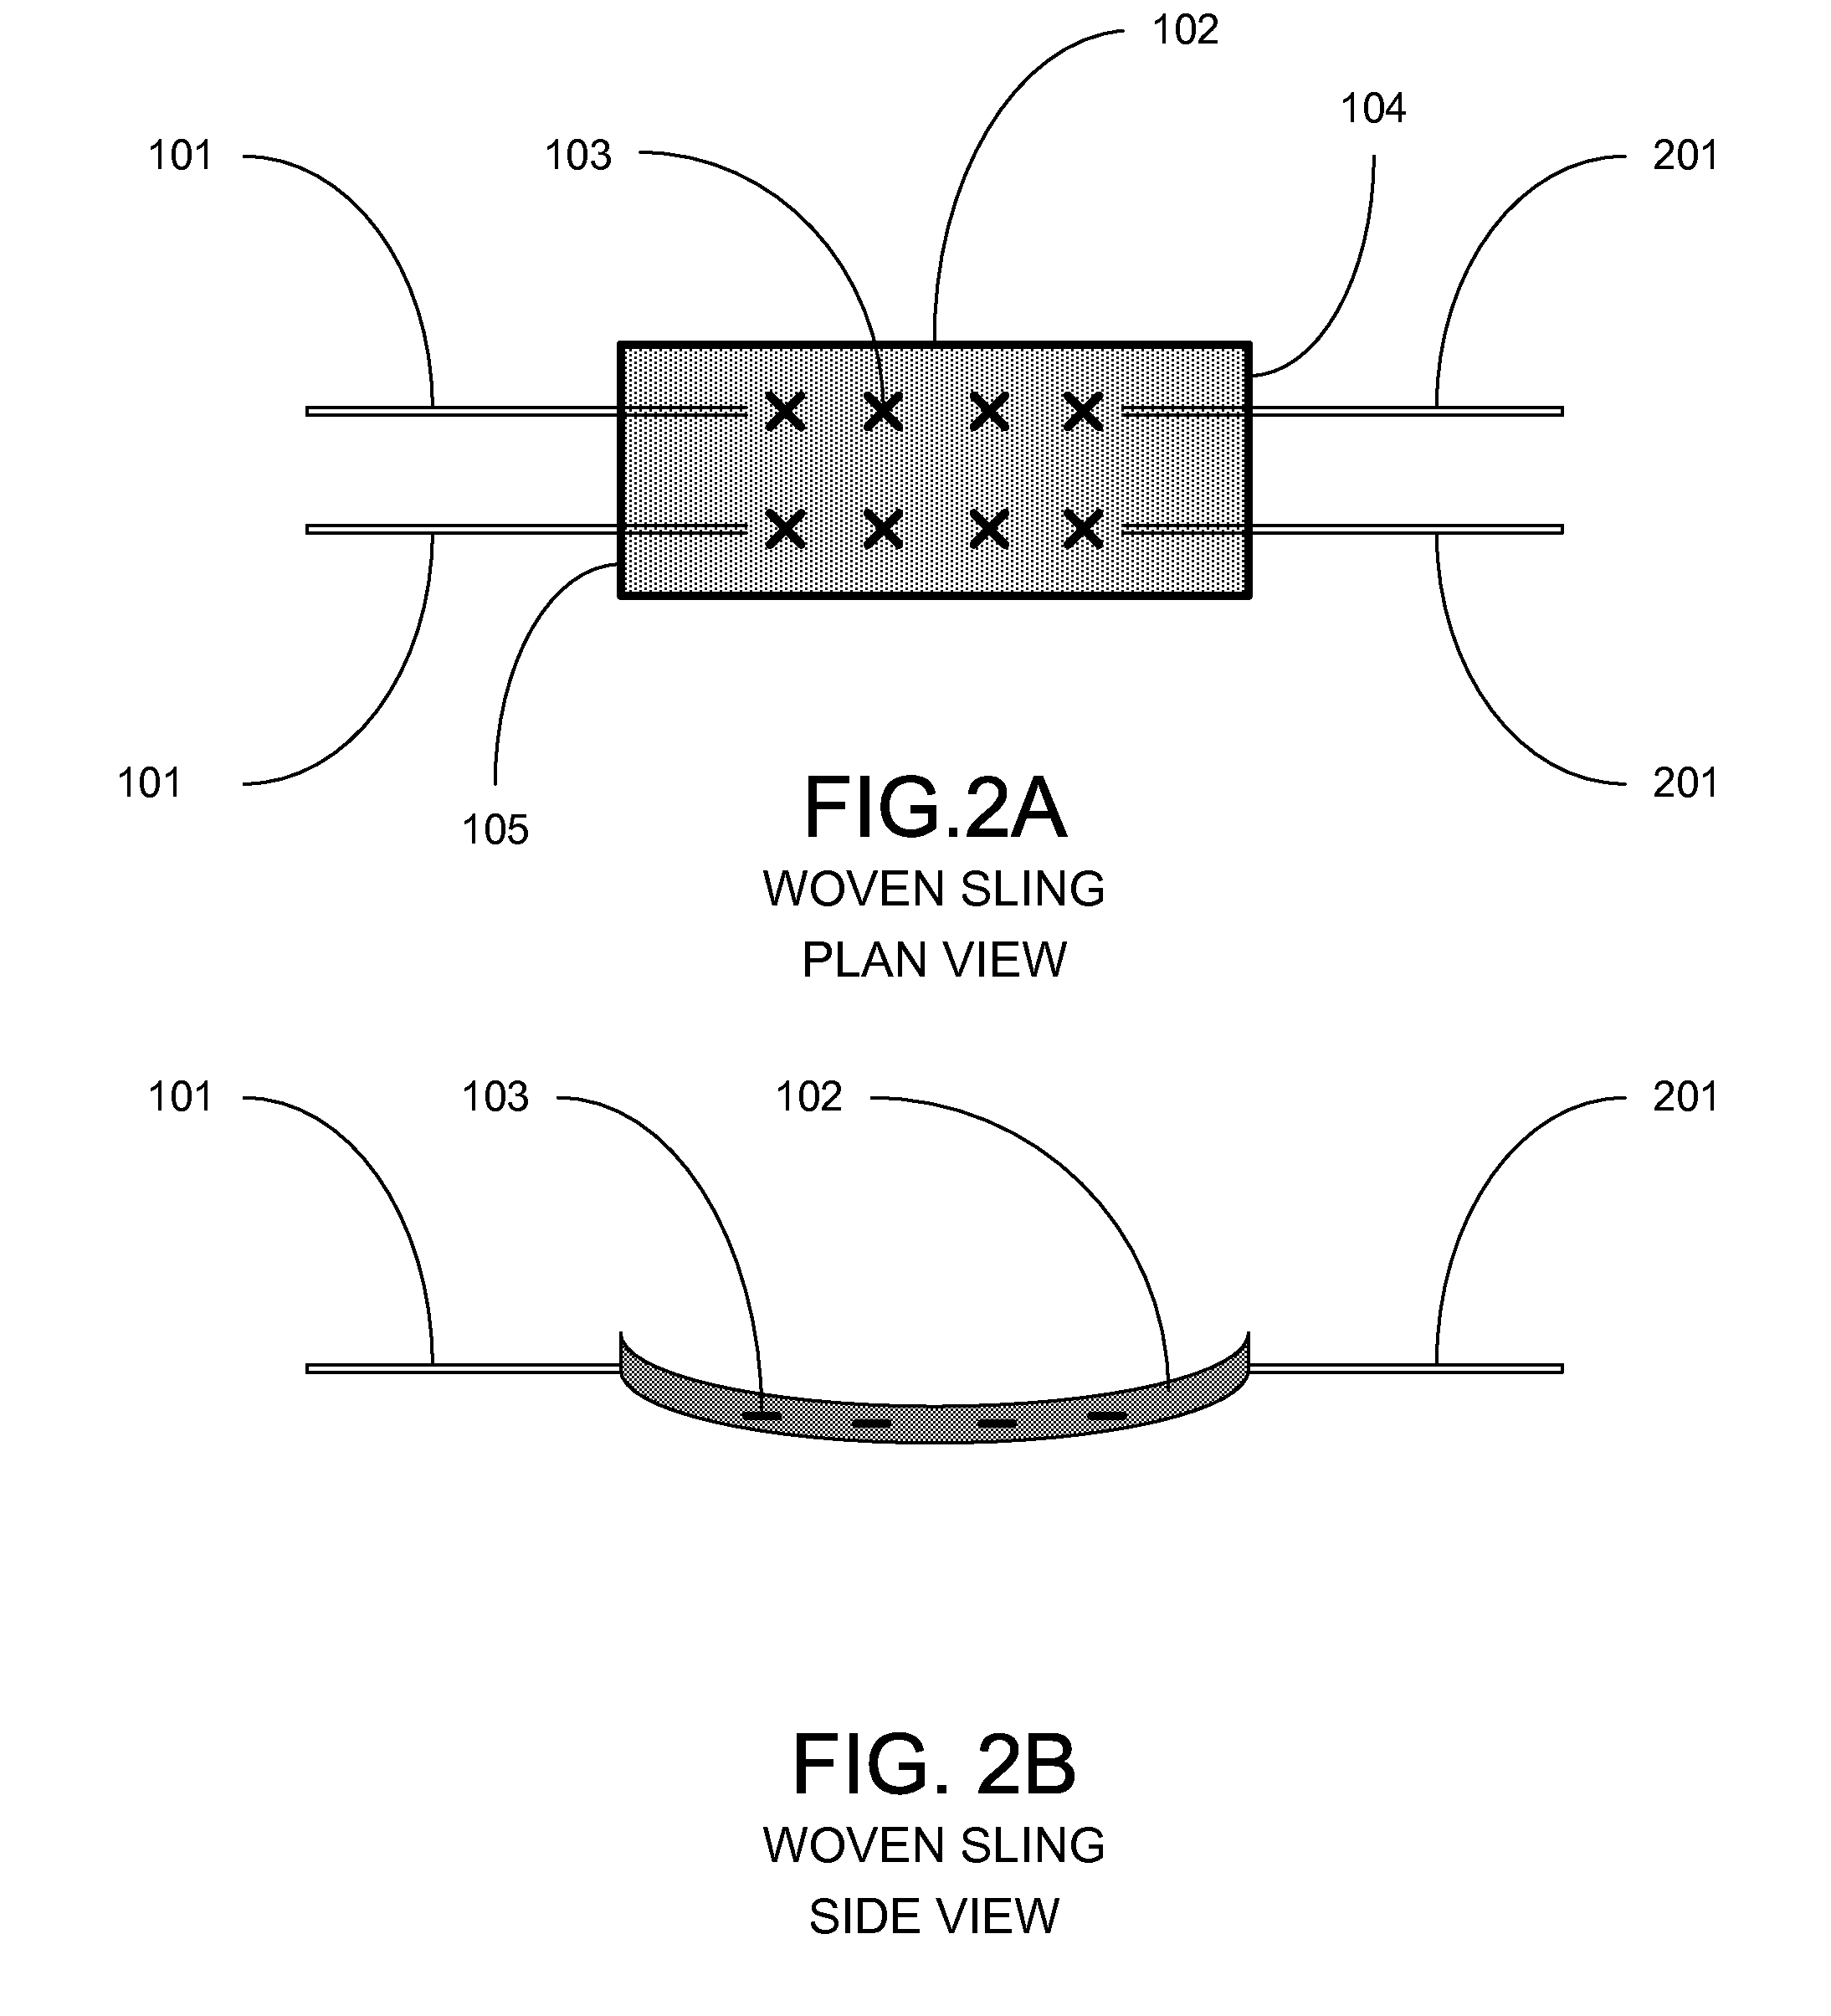 Surgical implantable stabilizer sling for basal joint arthroplasty